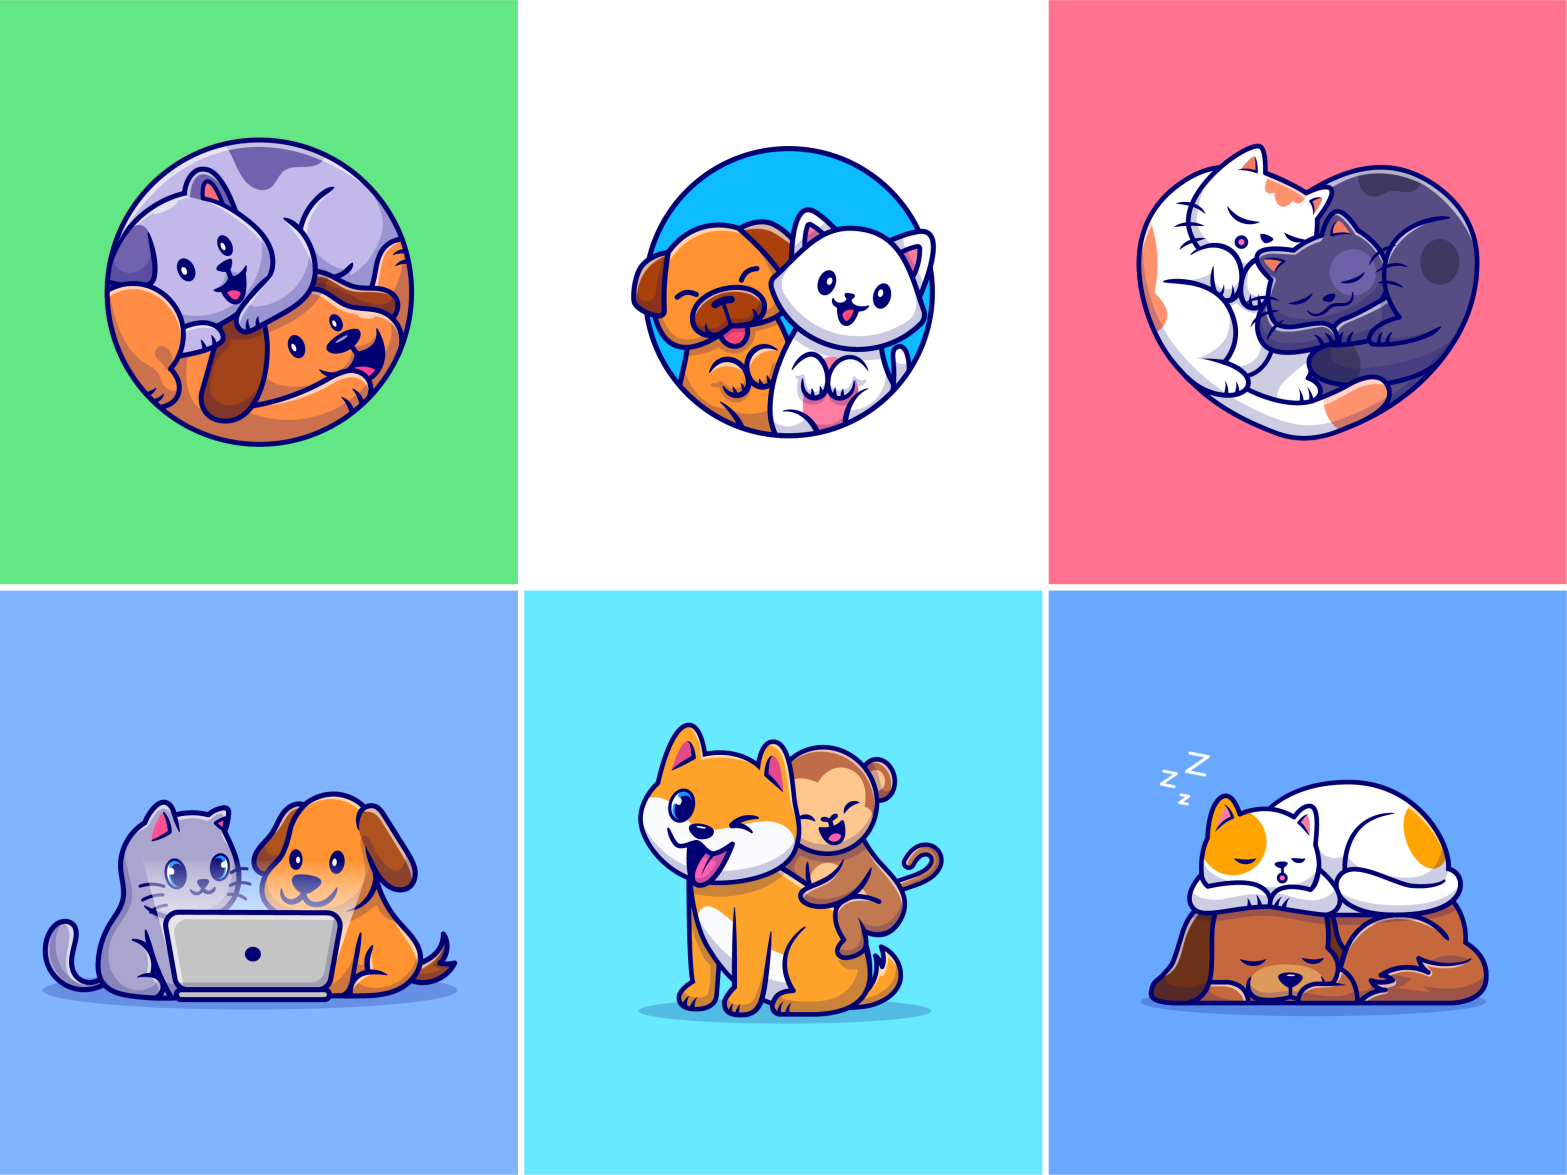 Animal friends by catalyst on Dribbble